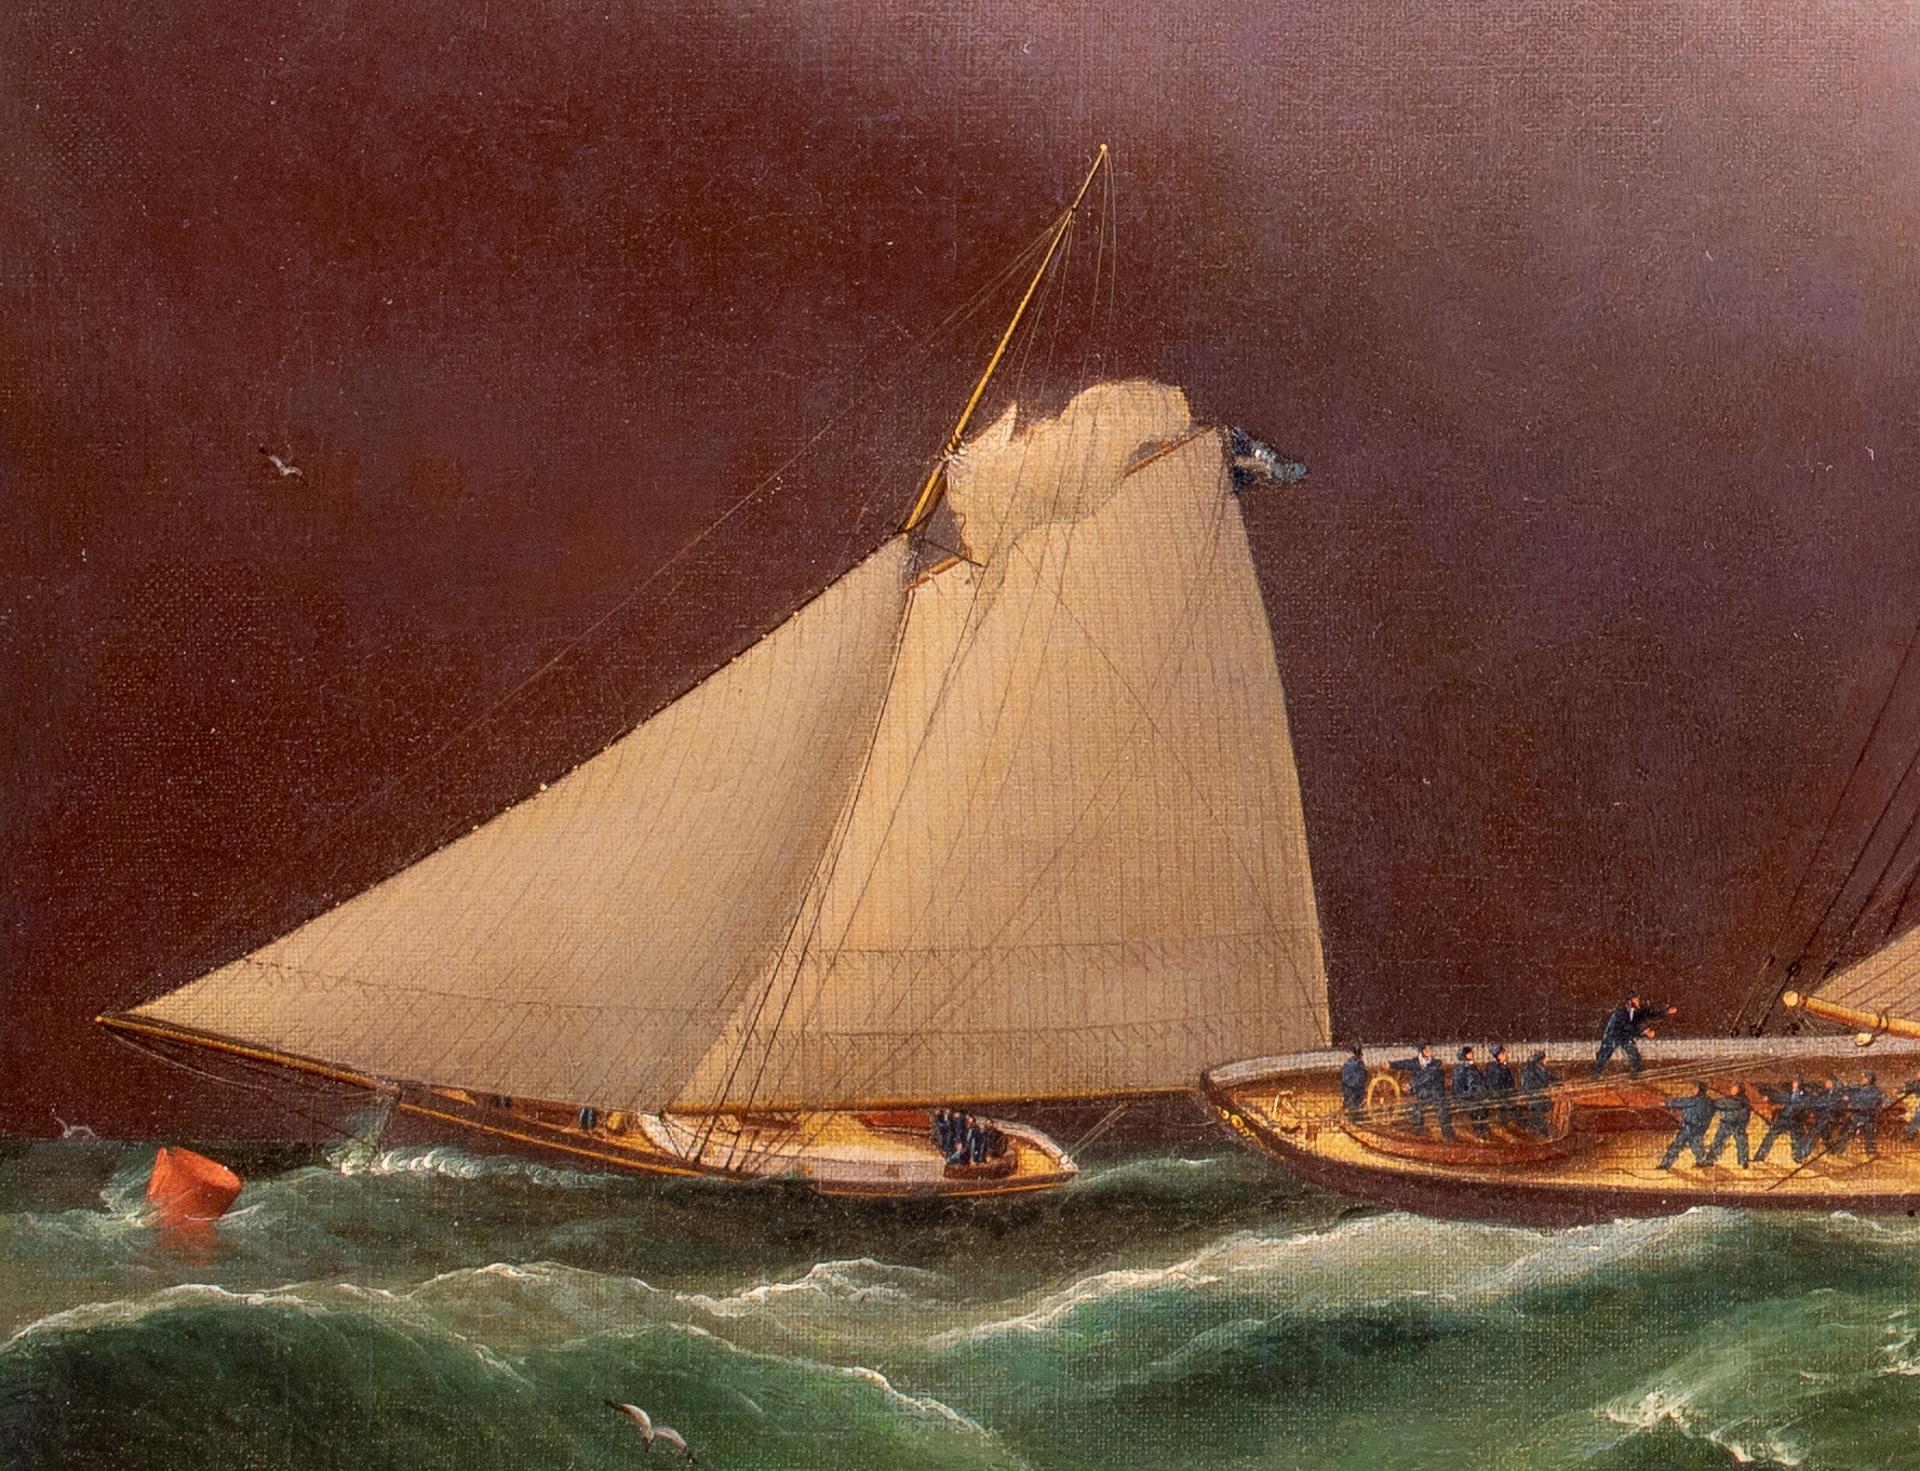 SAPPHO, DAUNTLESS and GRACIE Racing at Cape May 1871 - Brown Landscape Painting by James Edward Buttersworth